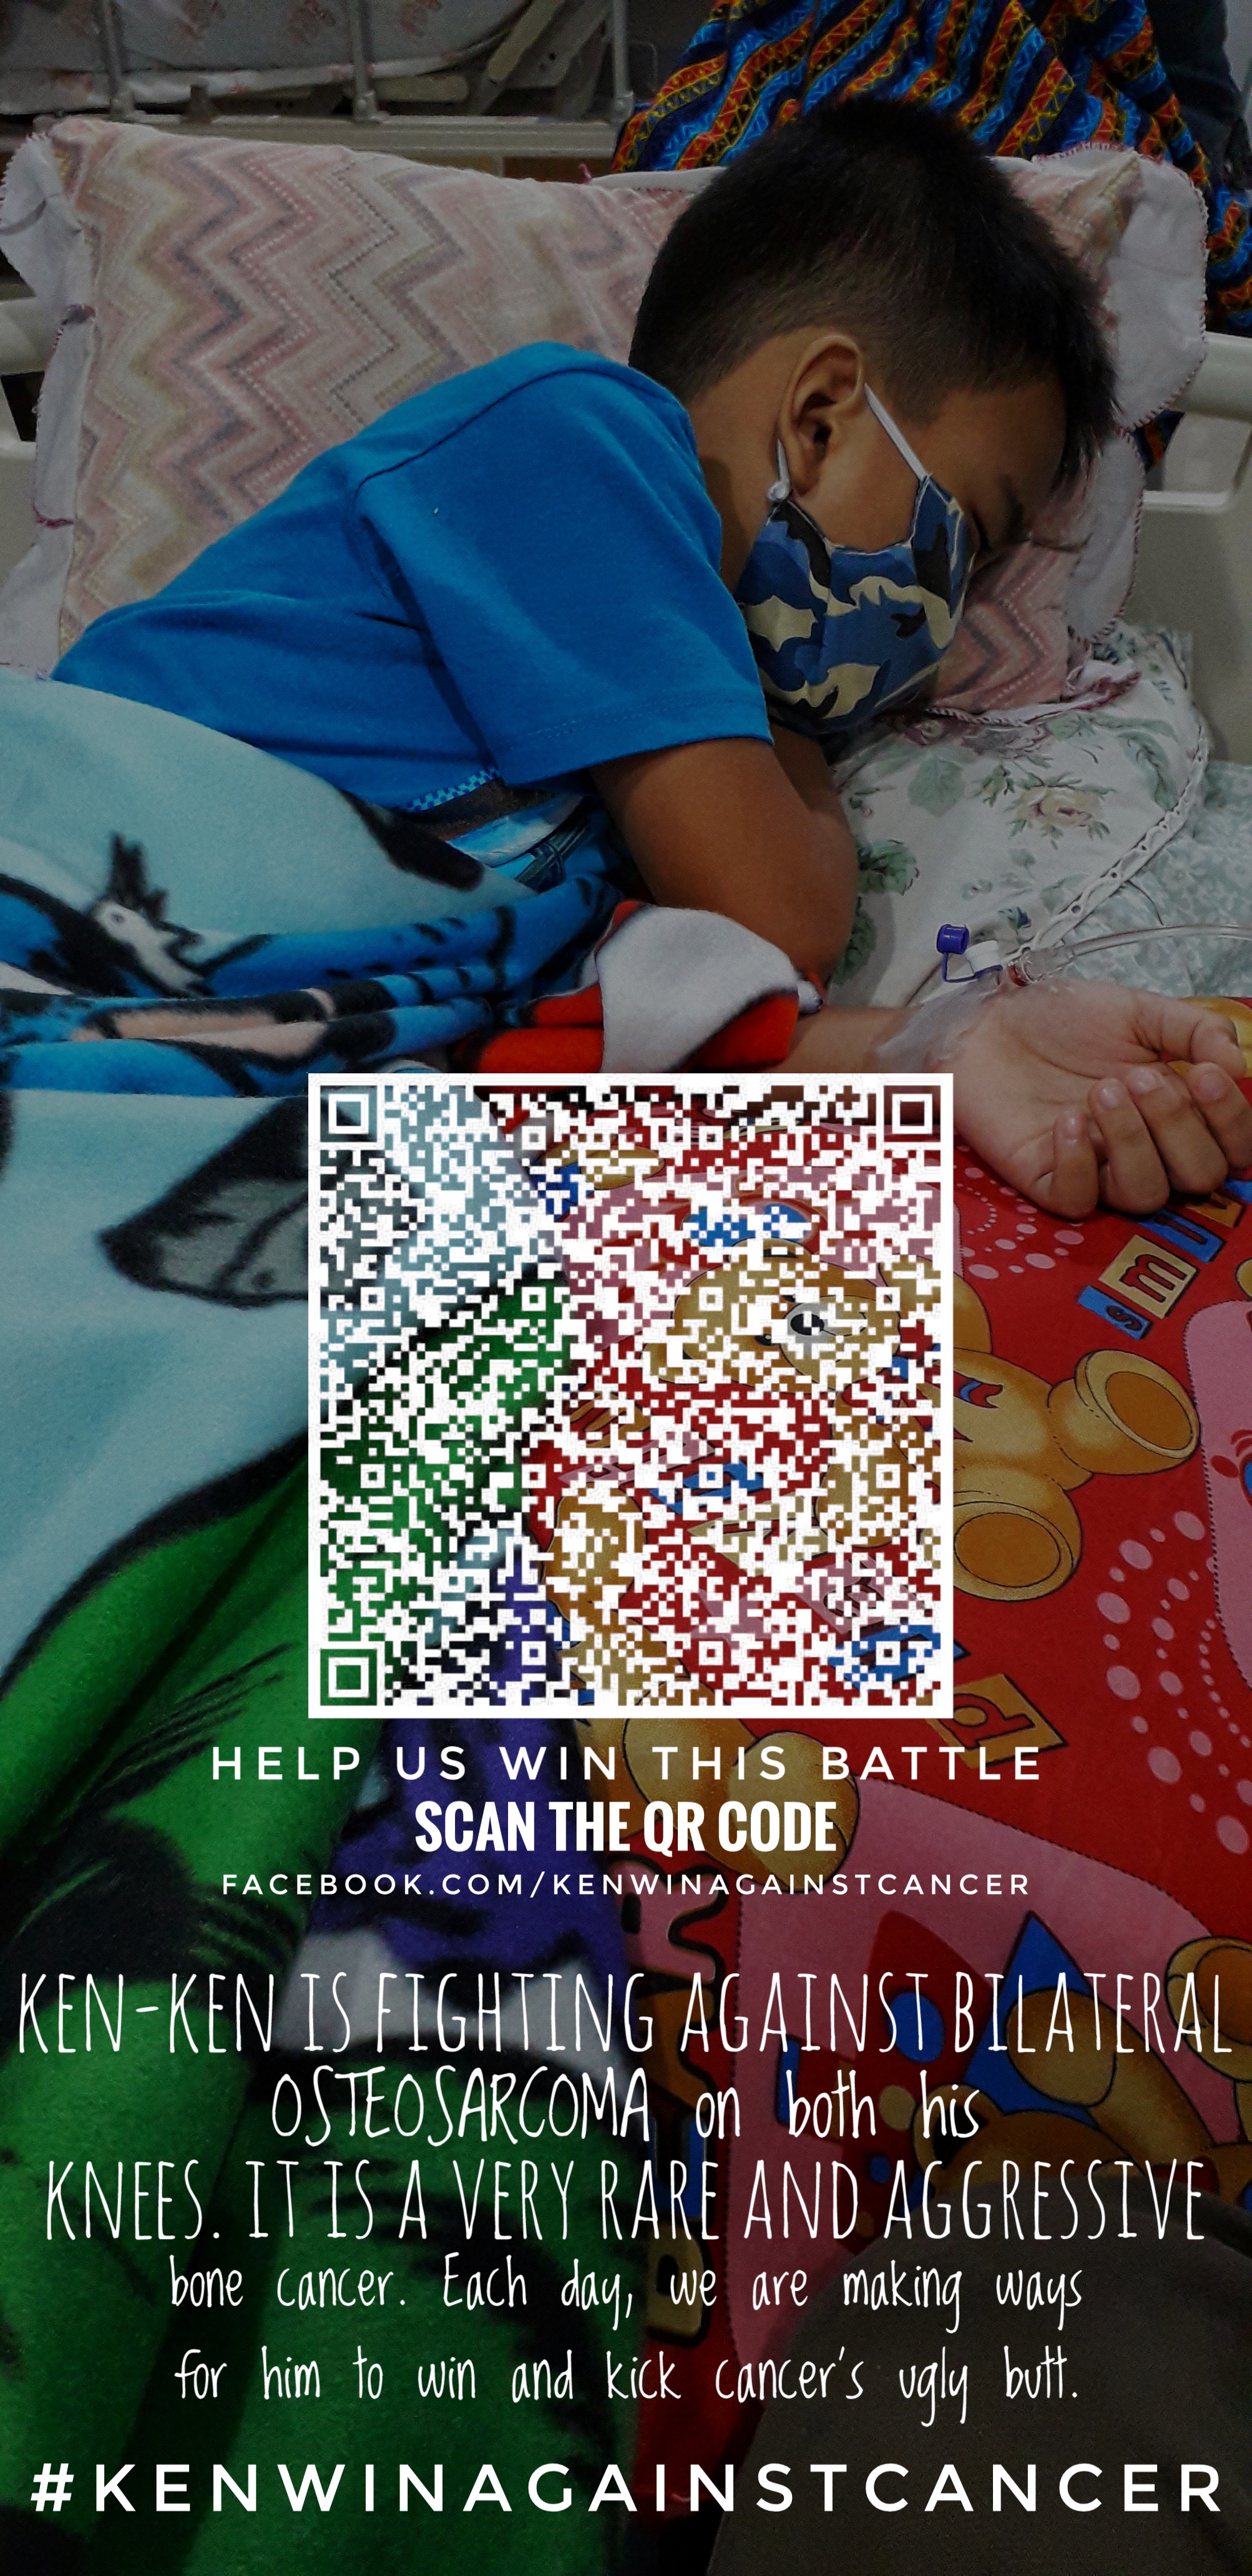 SCAN THE CODE for ways to HELP